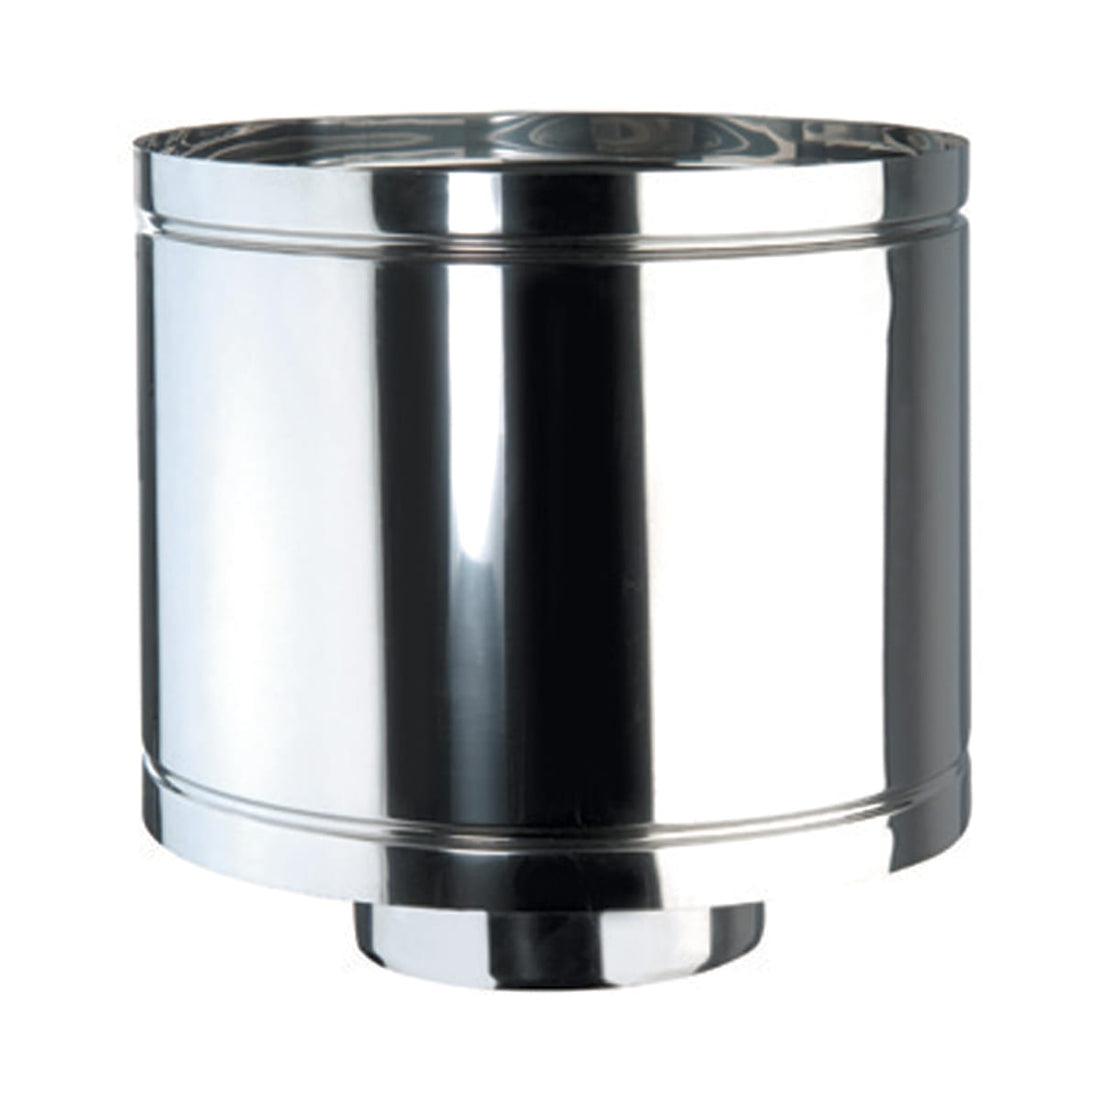 WEATHERPROOF INSULATED STAINLESS STEEL TERMINAL DIA80 MM